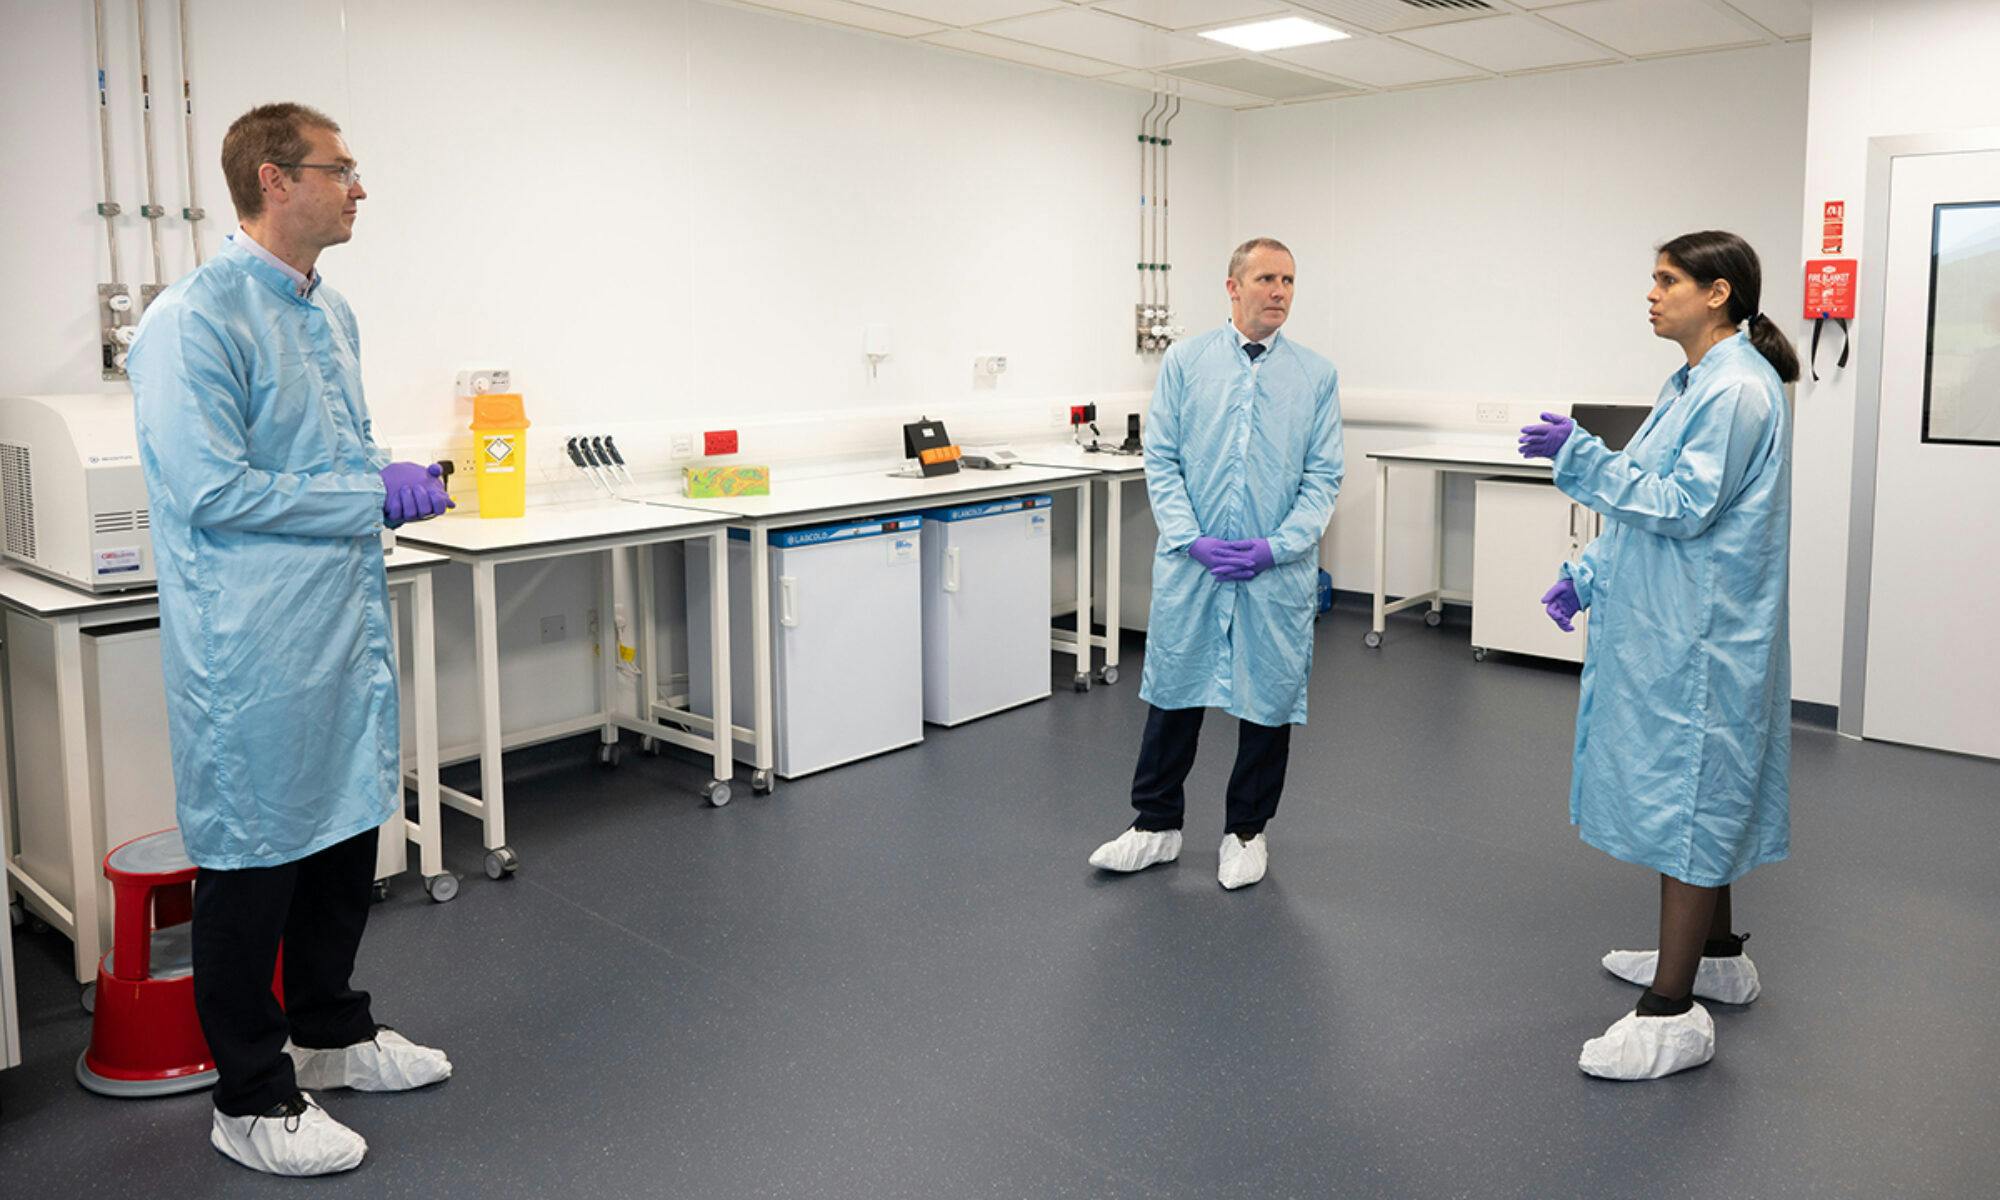 Cell and Gene Therapy Catapult opens new laboratories and offices in Edinburgh BioQuarter